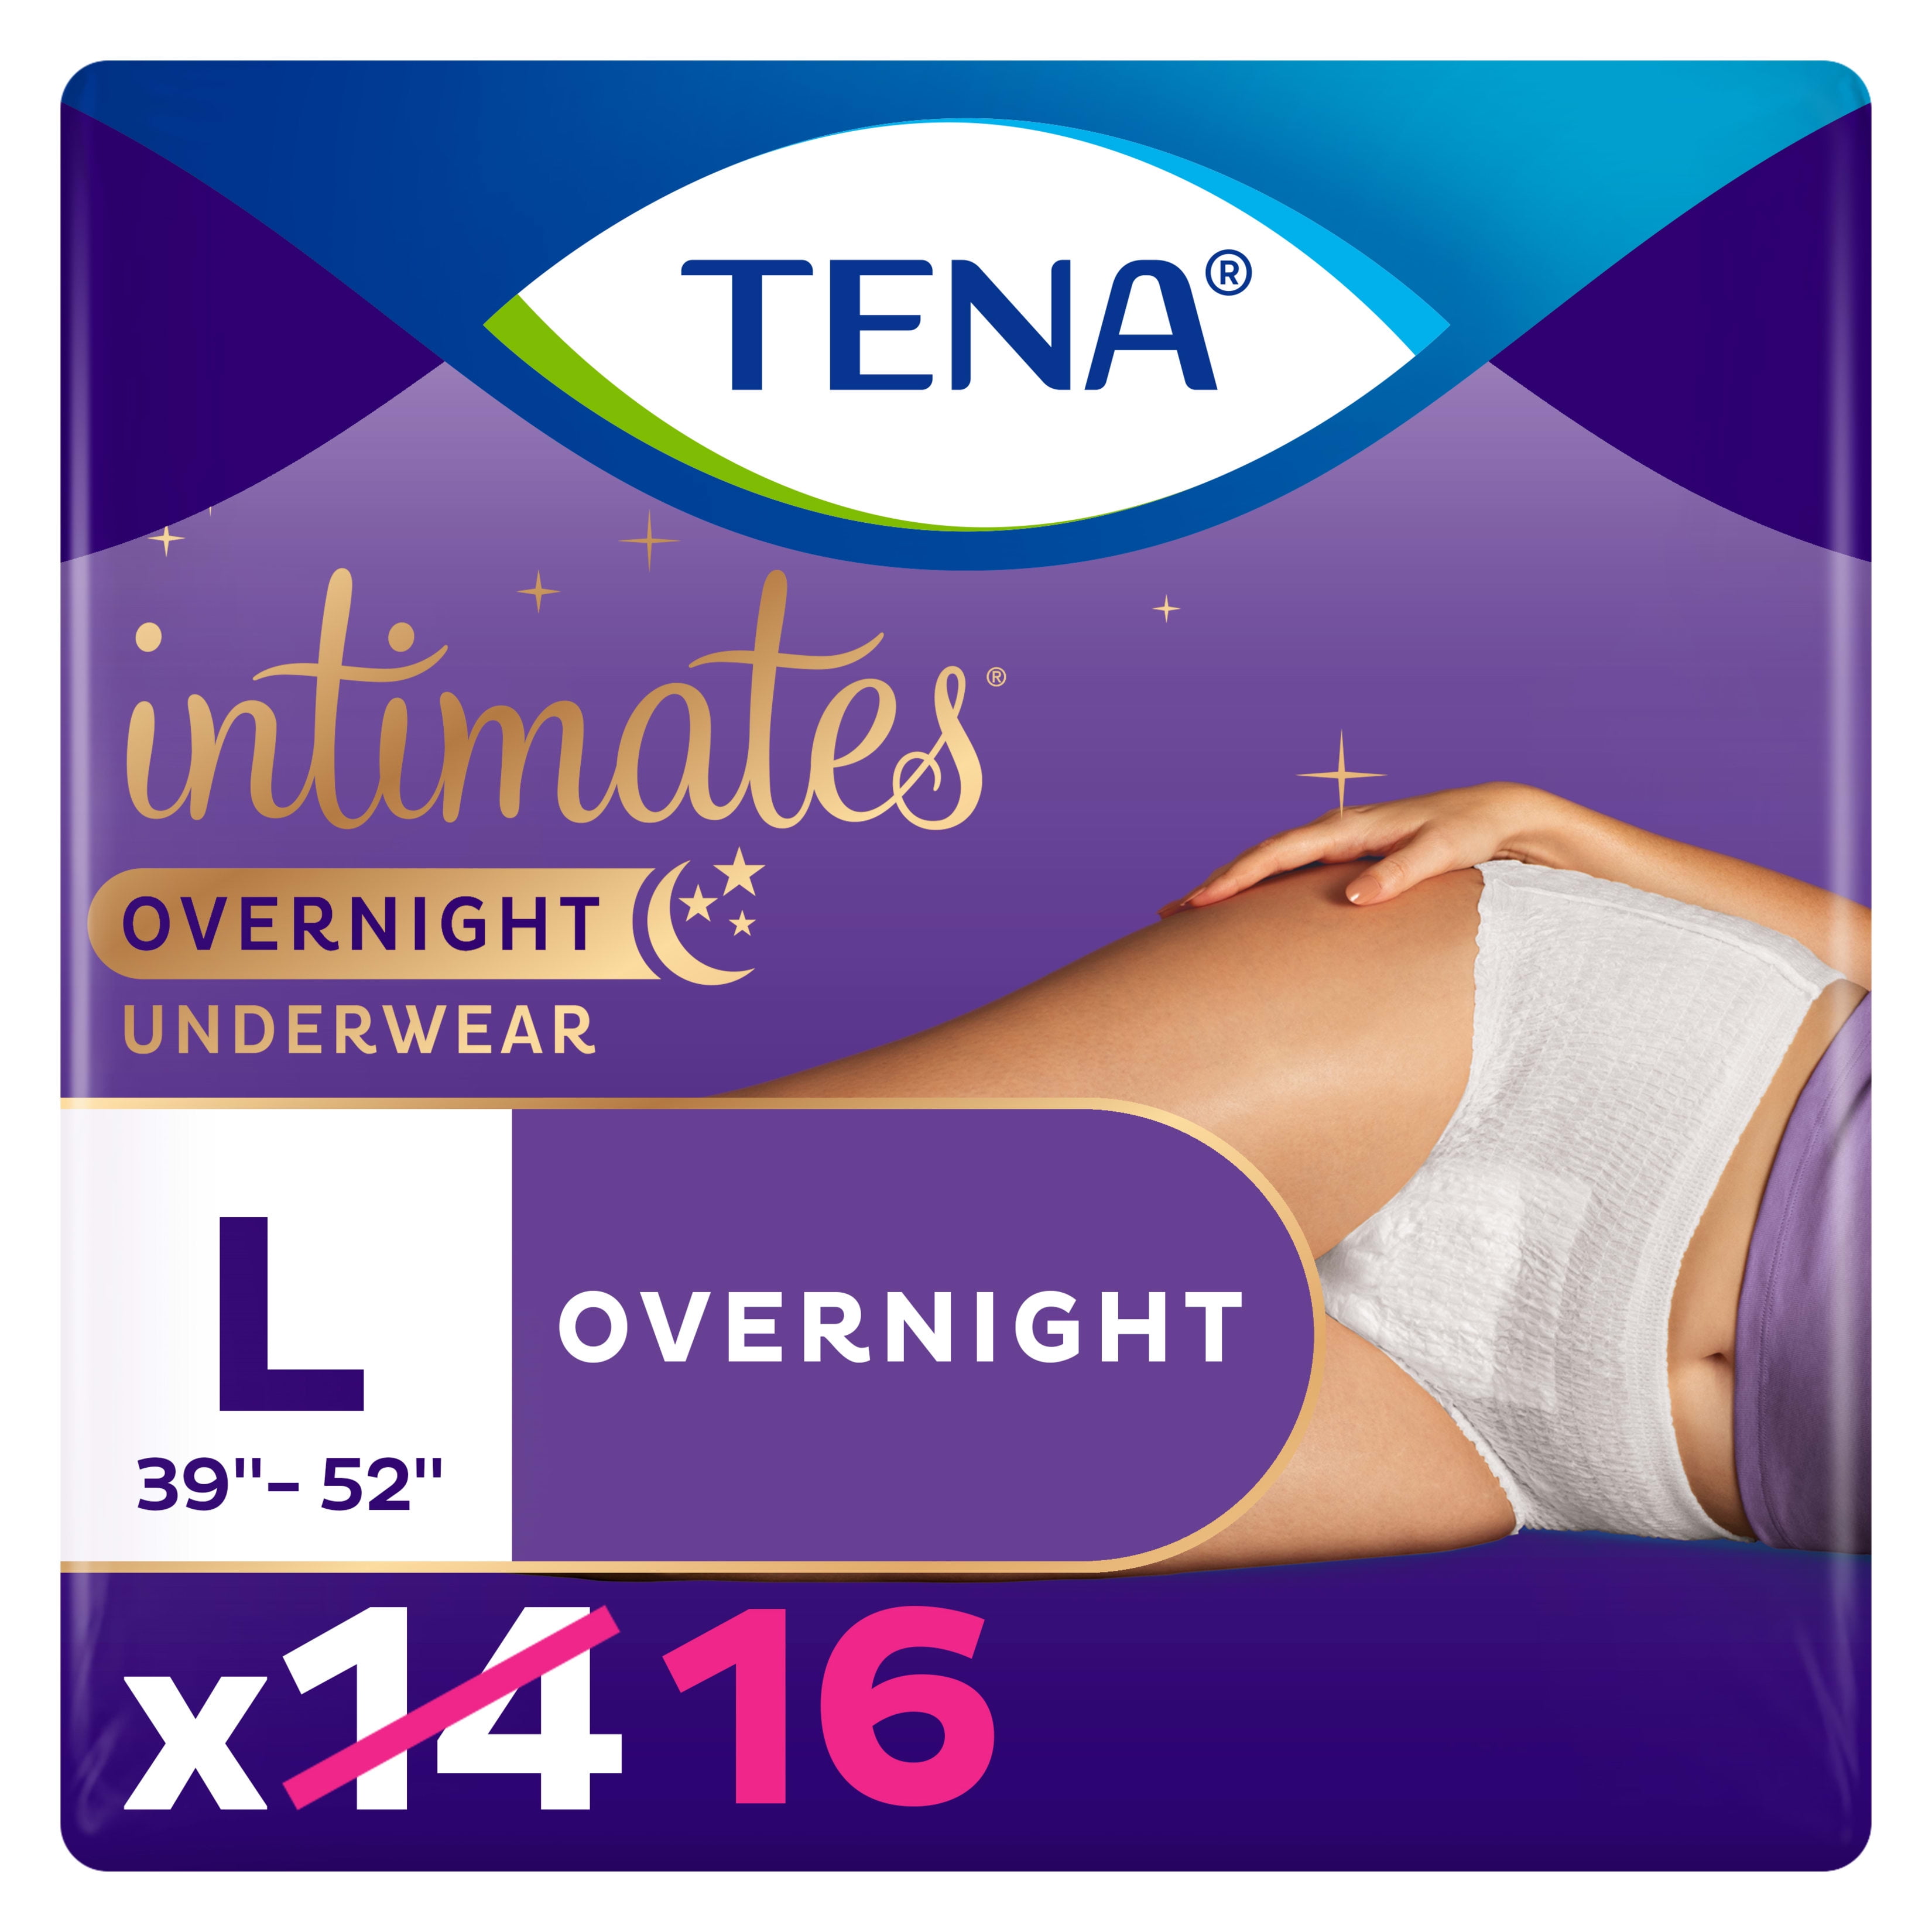 Tena Female Adult Absorbent Underwear, Count of 20 (Pack of 2)